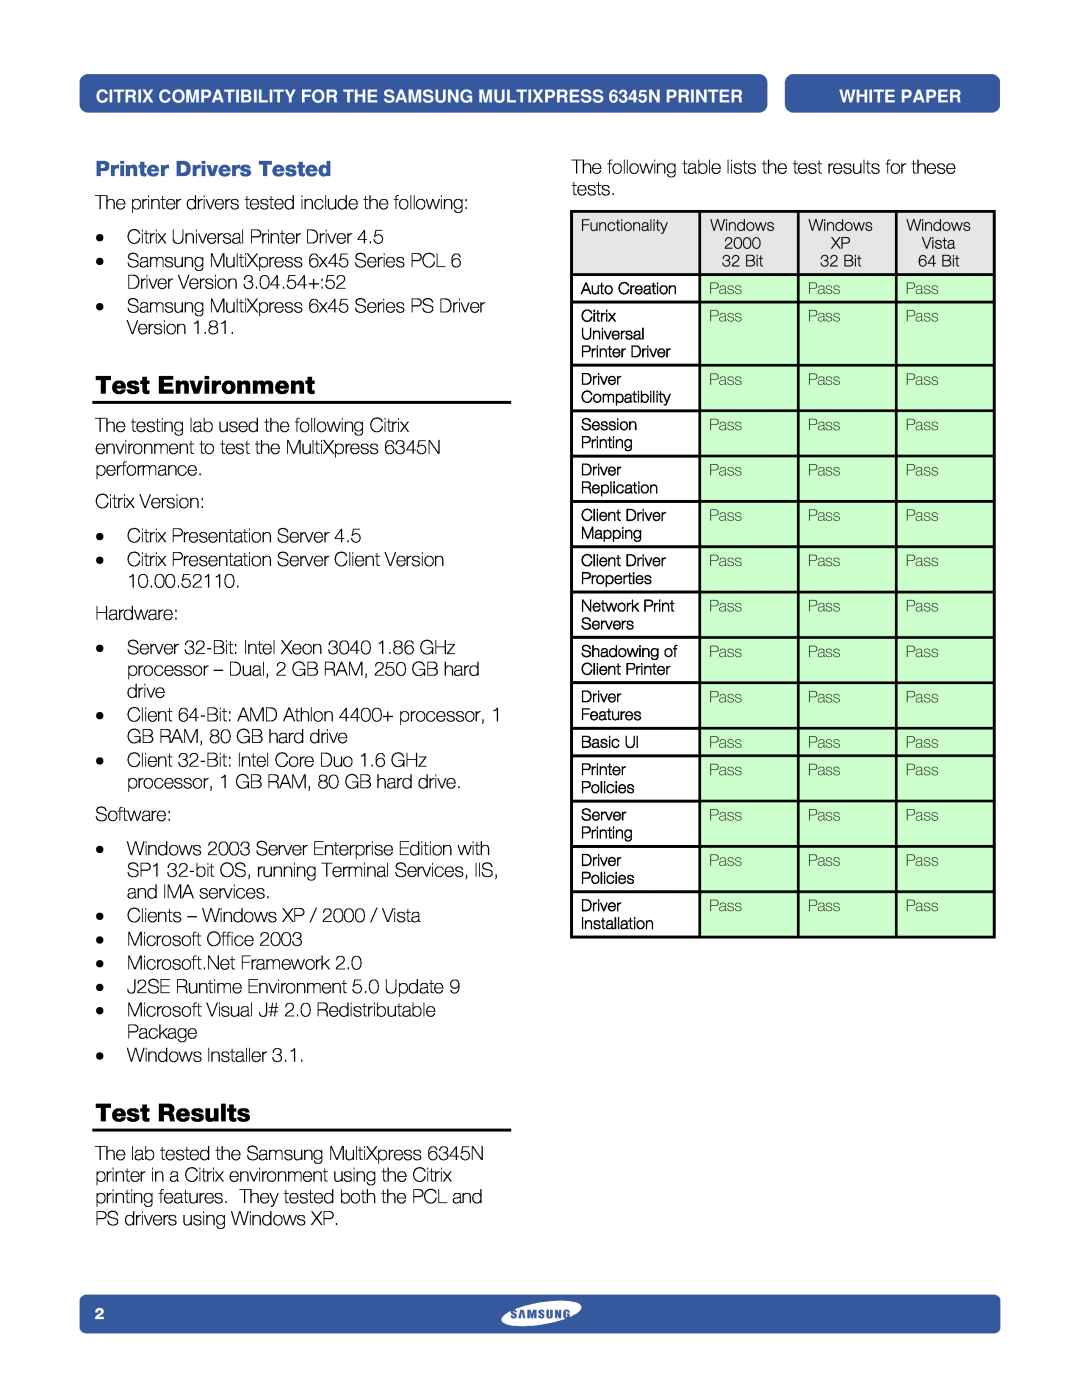 Samsung 6345N specifications Test Environment, Test Results, Printer Drivers Tested 